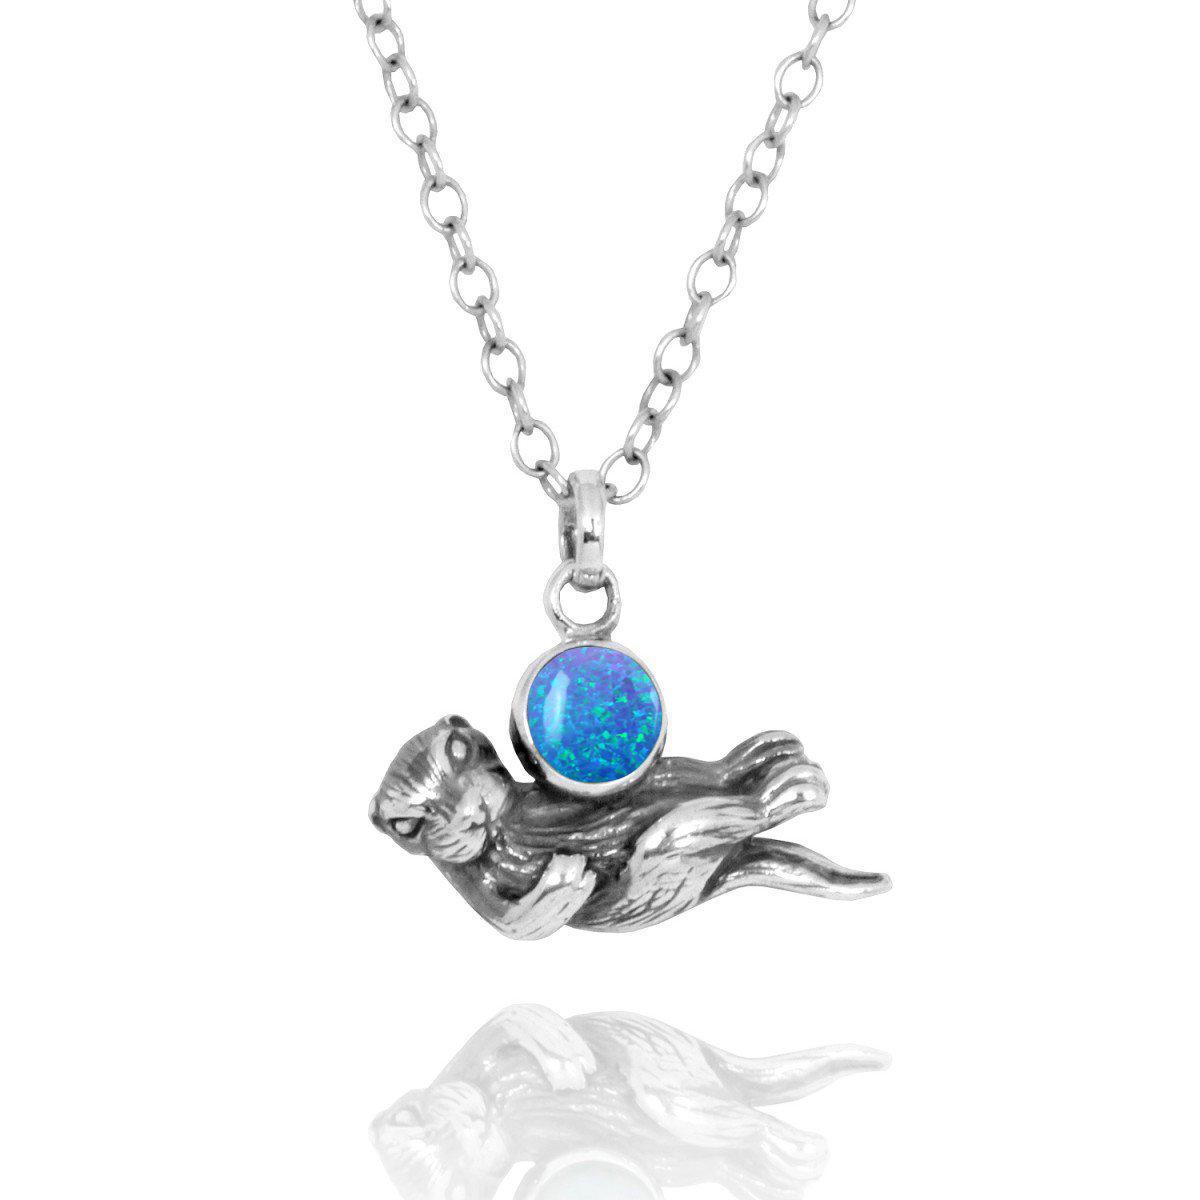 Floating Sea Otter Pendant Necklace with Blue Opal